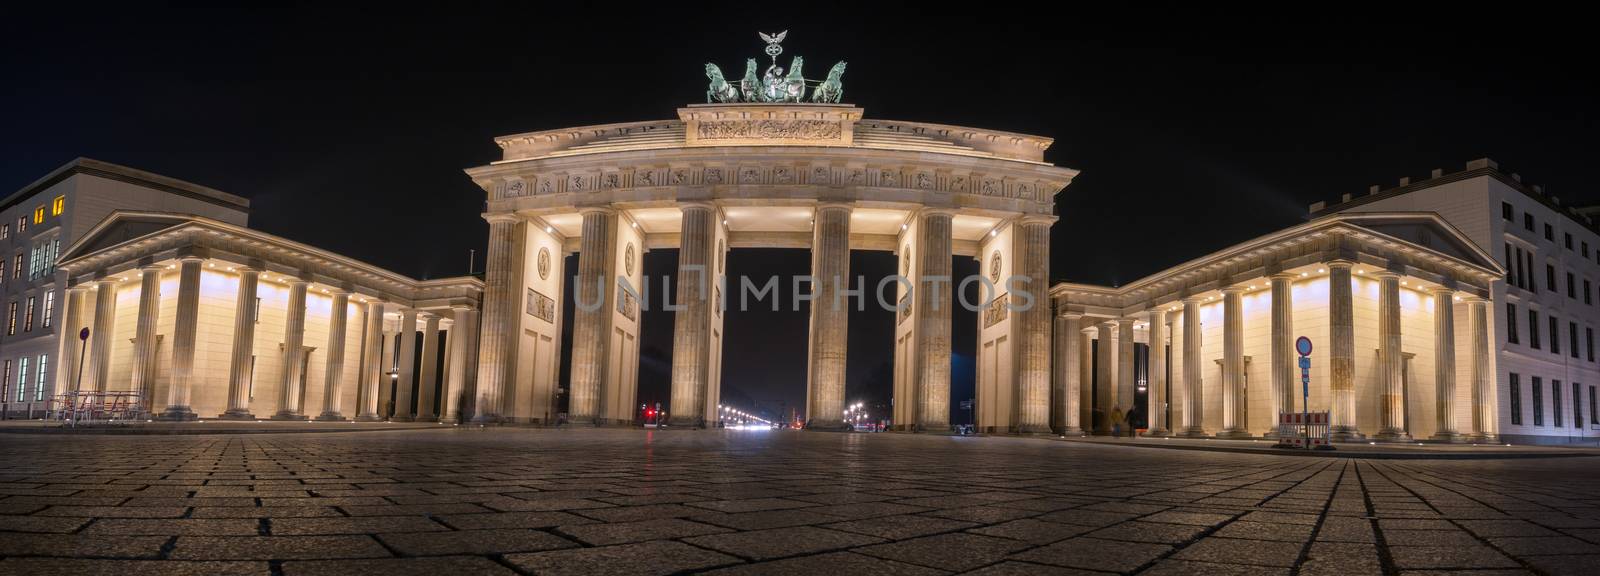 The Brandenburger Tor, one of the best-known landmarks and national symbols of Germany